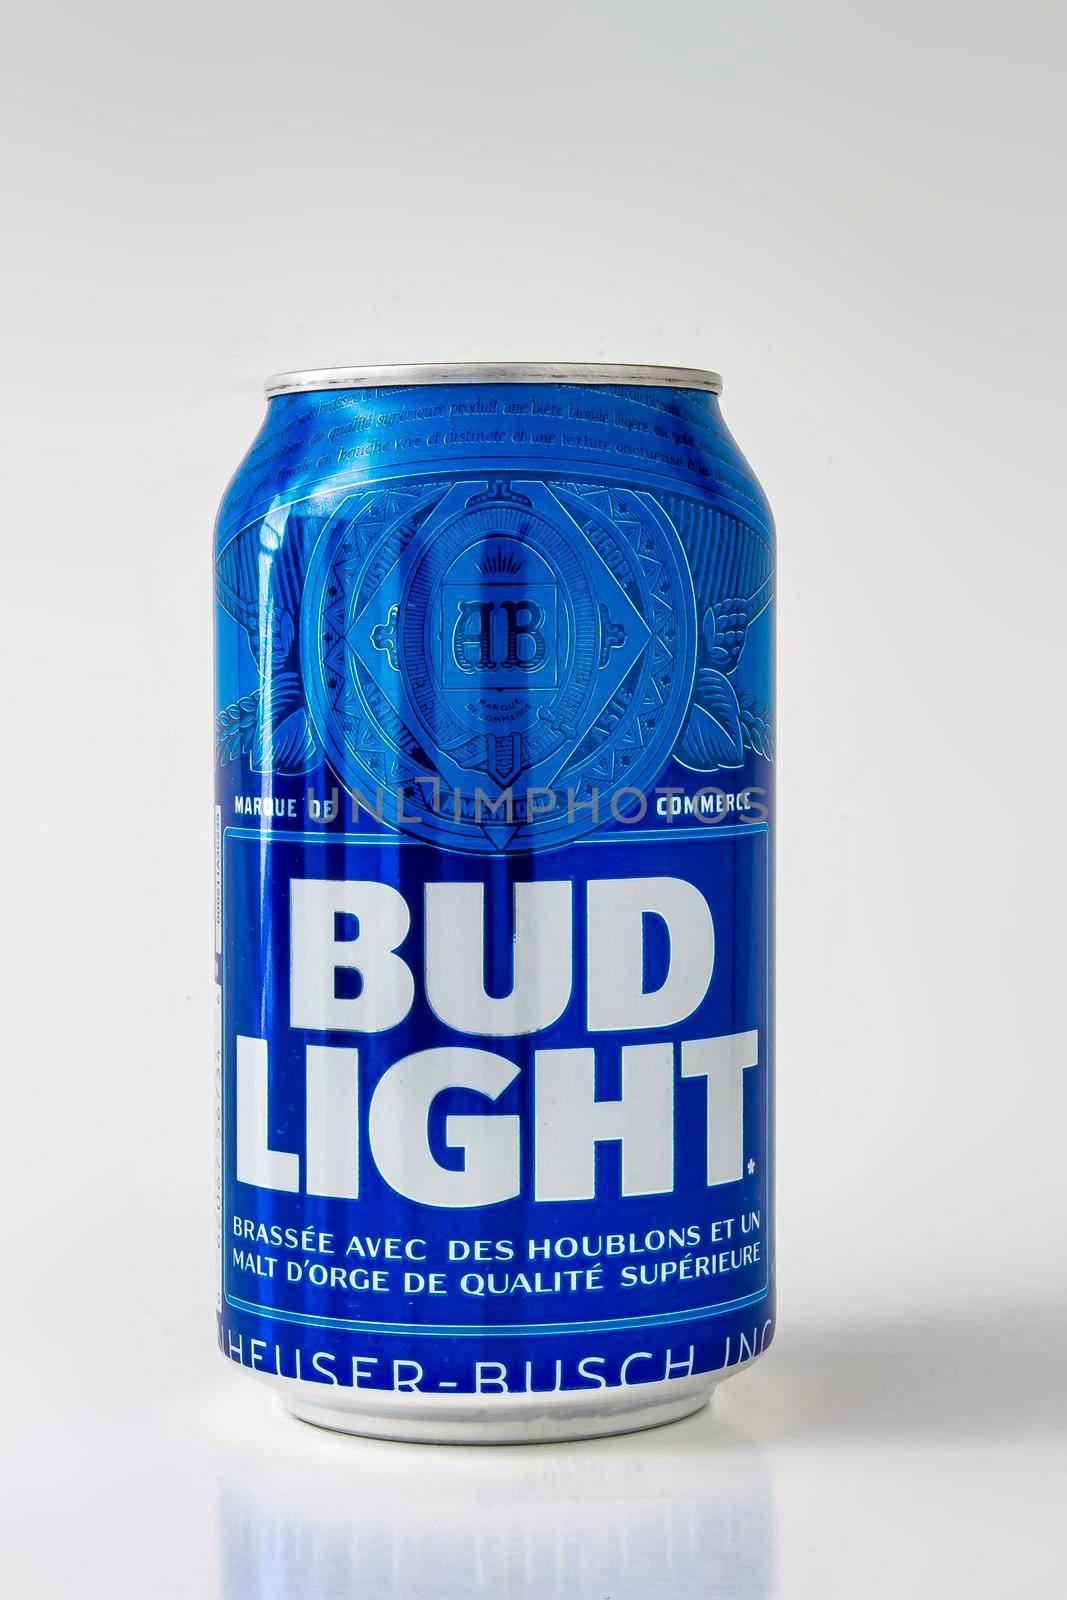 Calgary, Alberta, Canada. May 1, 2020. A beer can of bud light on a white background